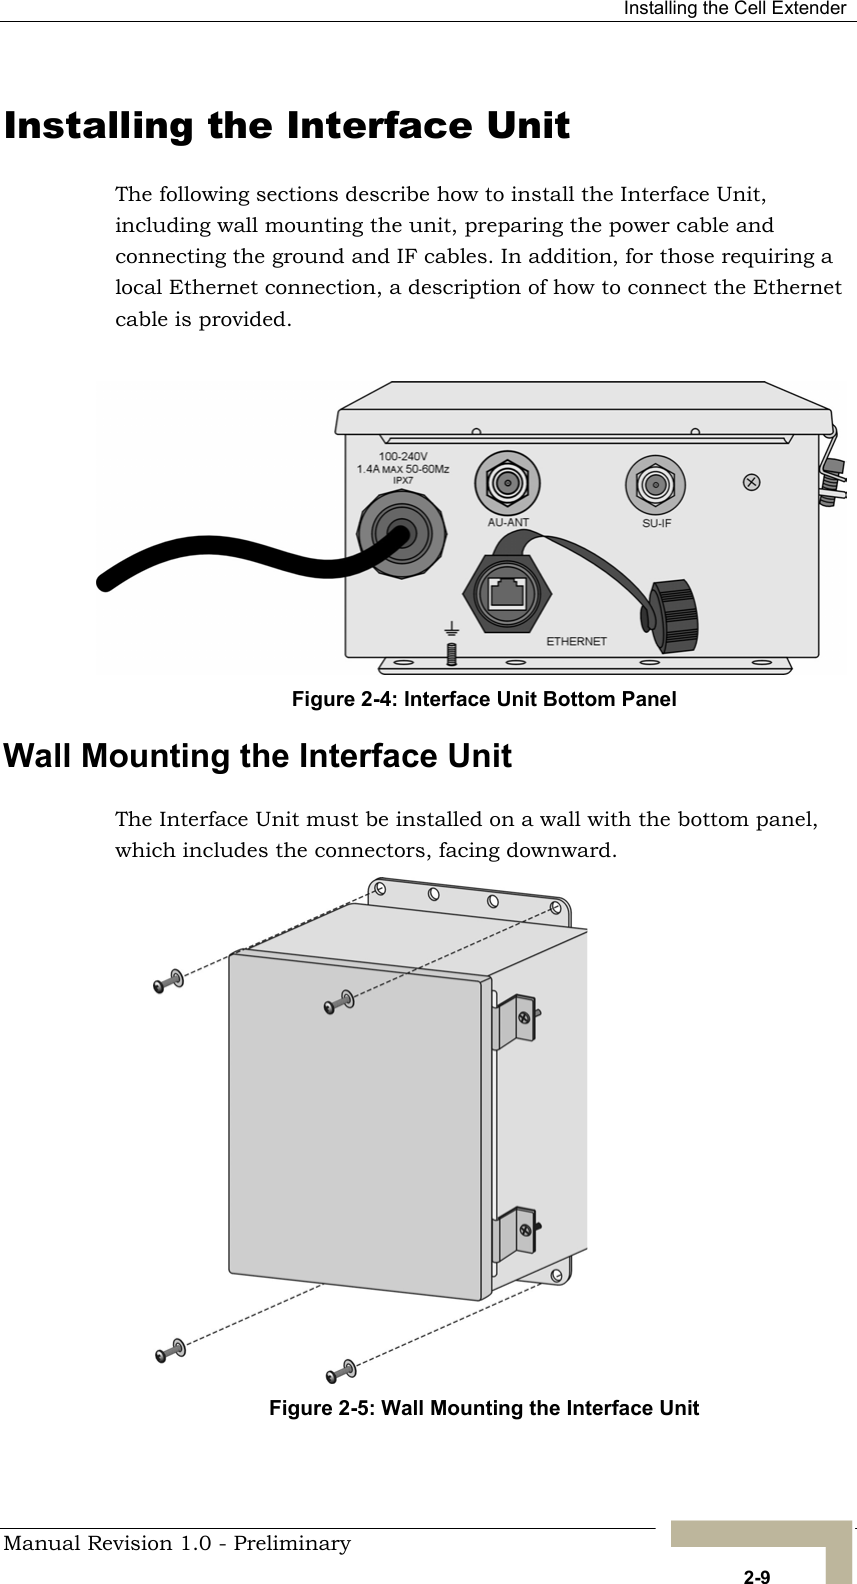  Installing the Cell Extender Installing the Interface Unit The following sections describe how to install the Interface Unit, including wall mounting the unit, preparing the power cable and connecting the ground and IF cables. In addition, for those requiring a local Ethernet connection, a description of how to connect the Ethernet cable is provided.  Figure 2-4: Interface Unit Bottom Panel Wall Mounting the Interface Unit The Interface Unit must be installed on a wall with the bottom panel, which includes the connectors, facing downward. Figure 2-5: Wall Mounting the Interface Unit   Manual Revision 1.0 - Preliminary   2-9 